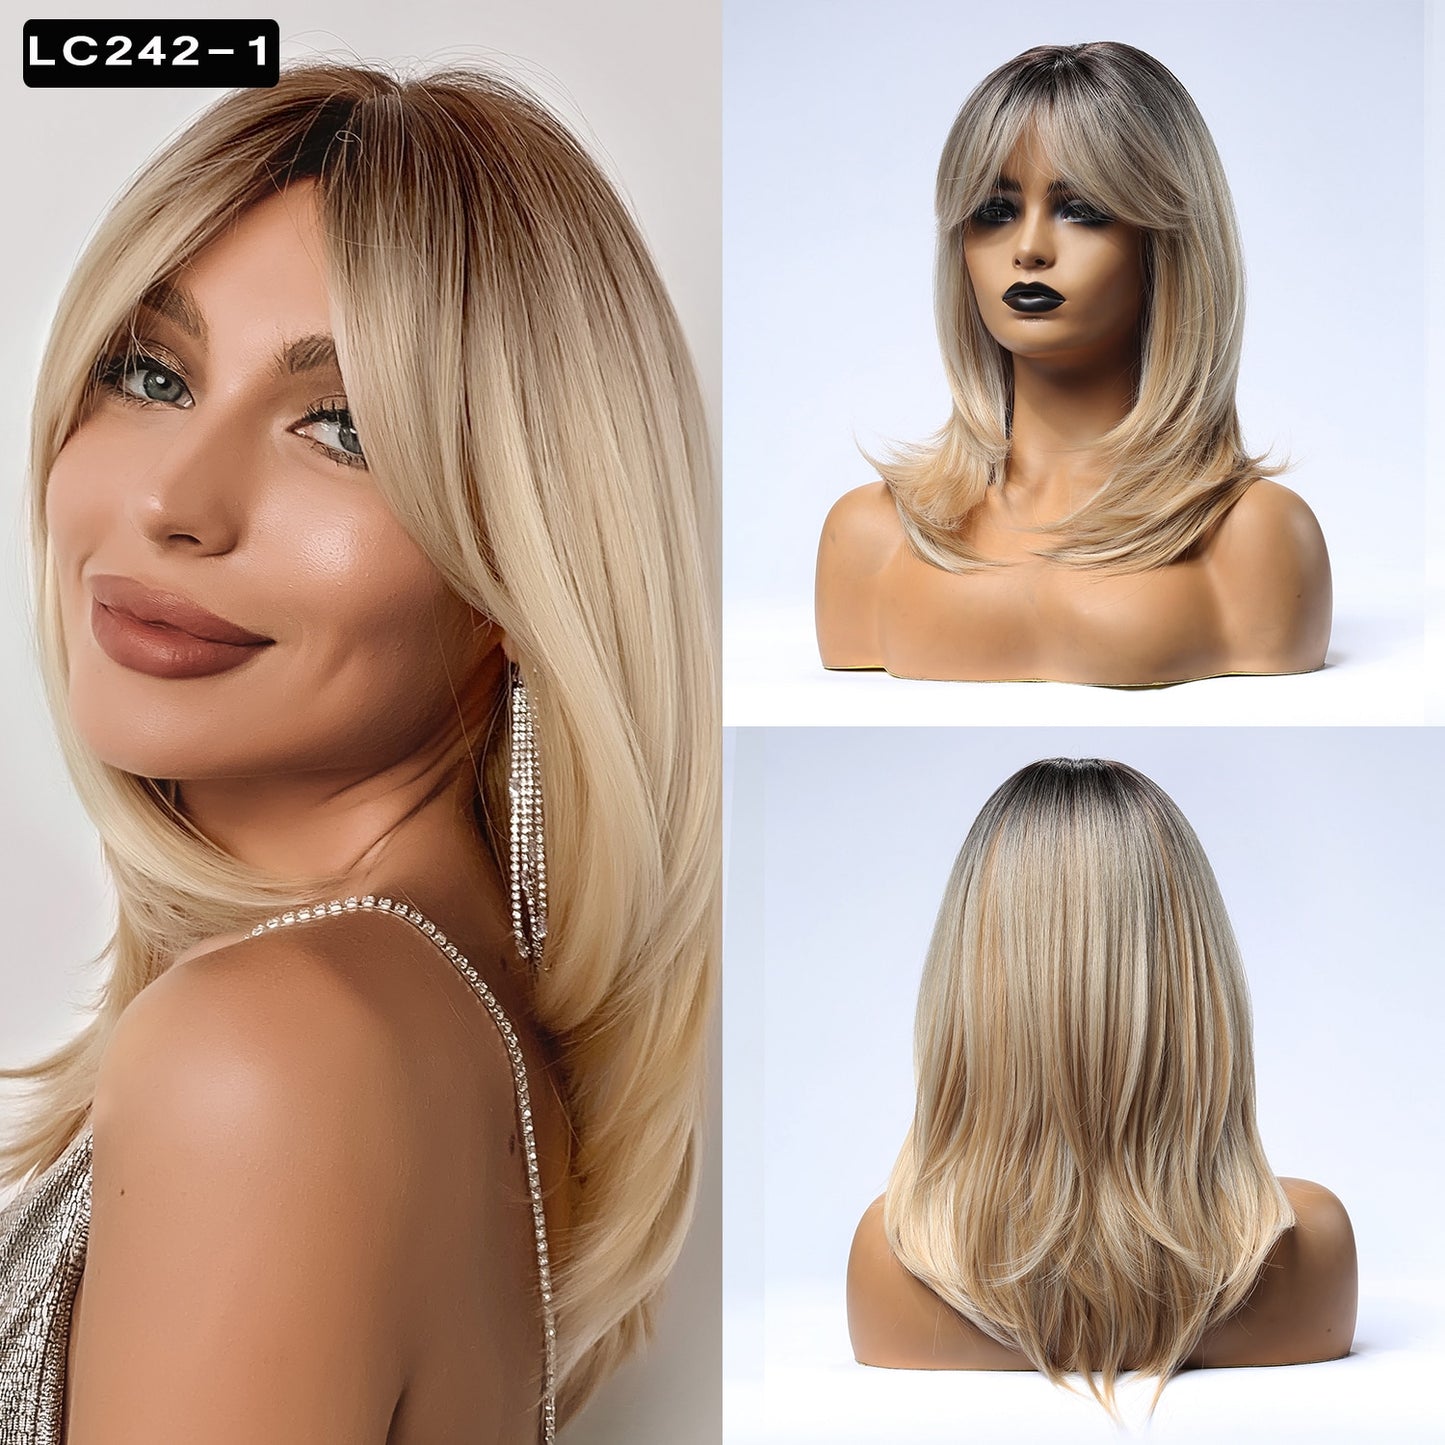 Element Synthetic Fiber Wigs for Women Long Straight Wavy Brown Blonde Wig with Bangs Heat Resistant Fashion Natural Daily Party